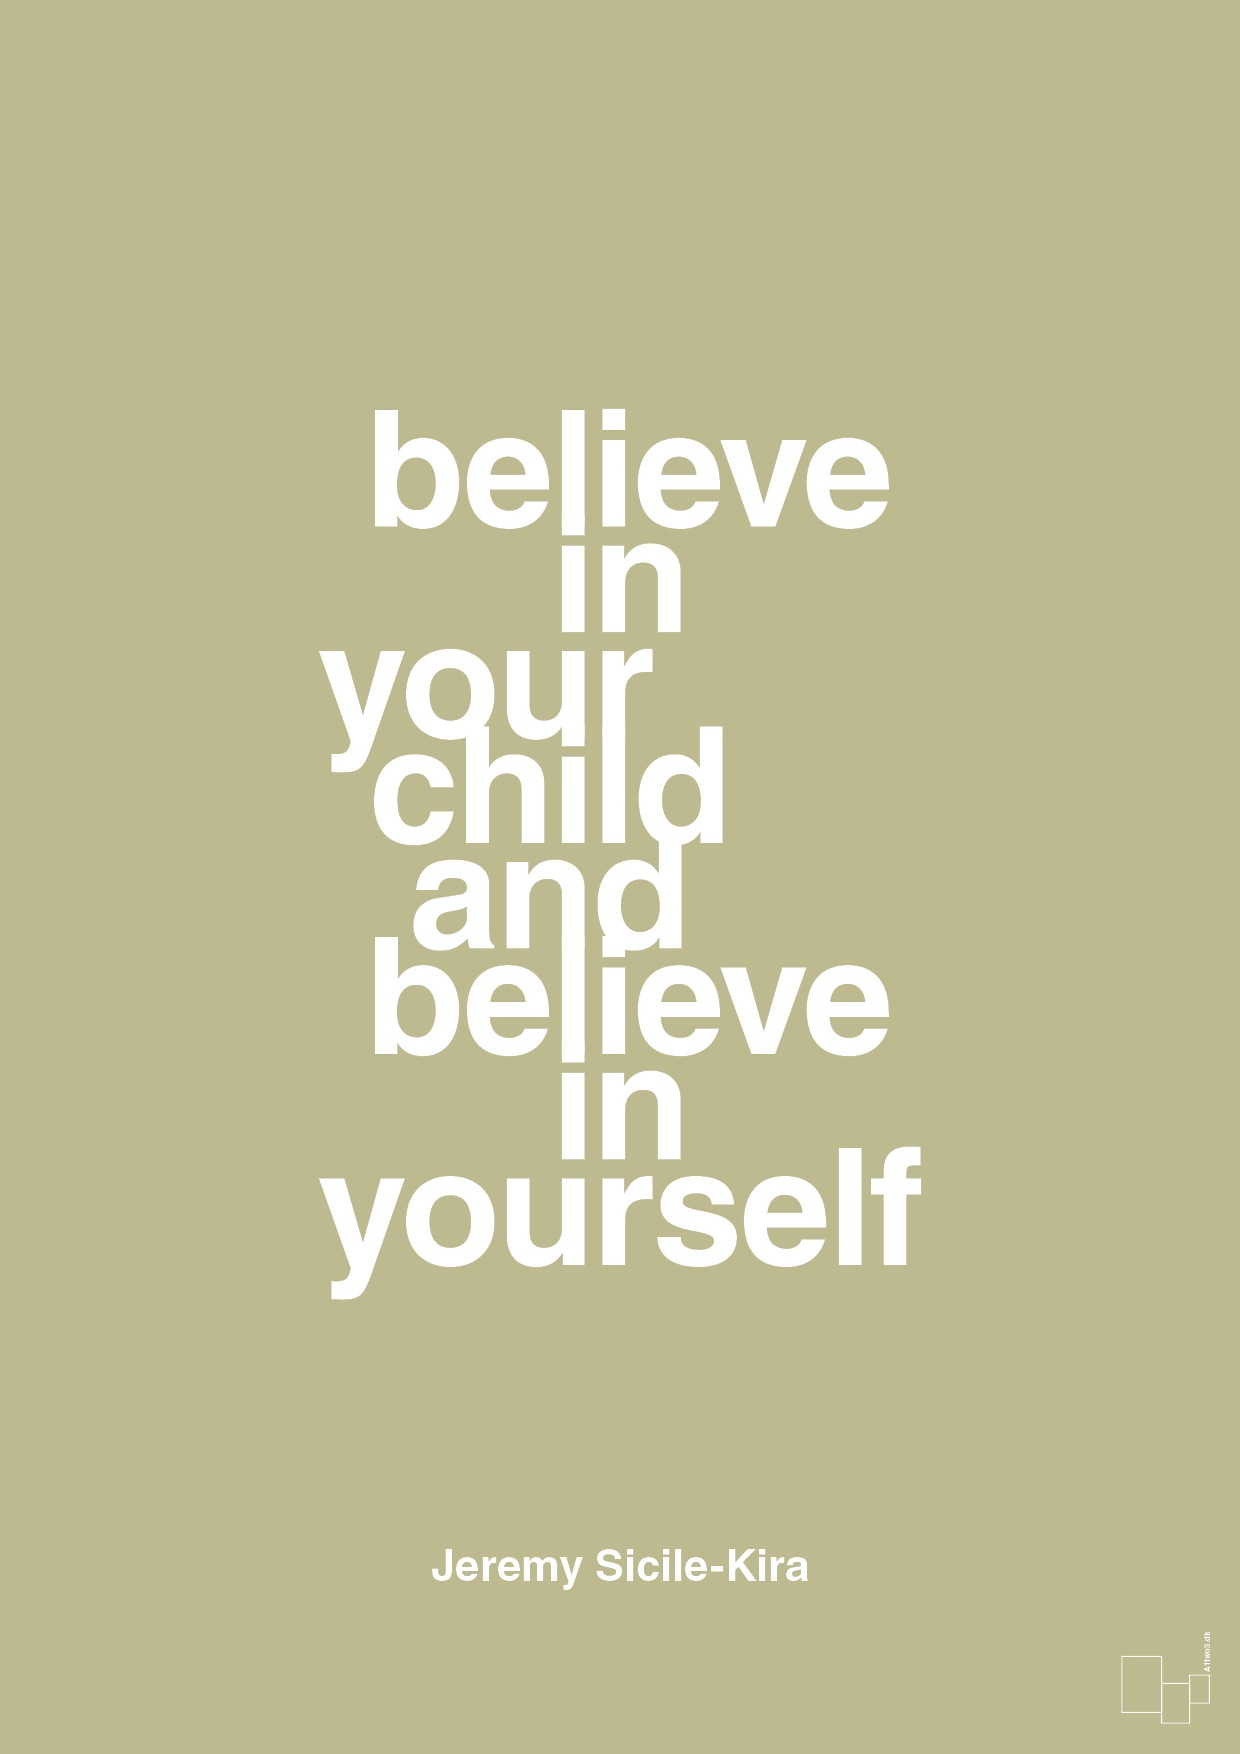 believe in your child and believe in yourself - Plakat med Samfund i Back to Nature